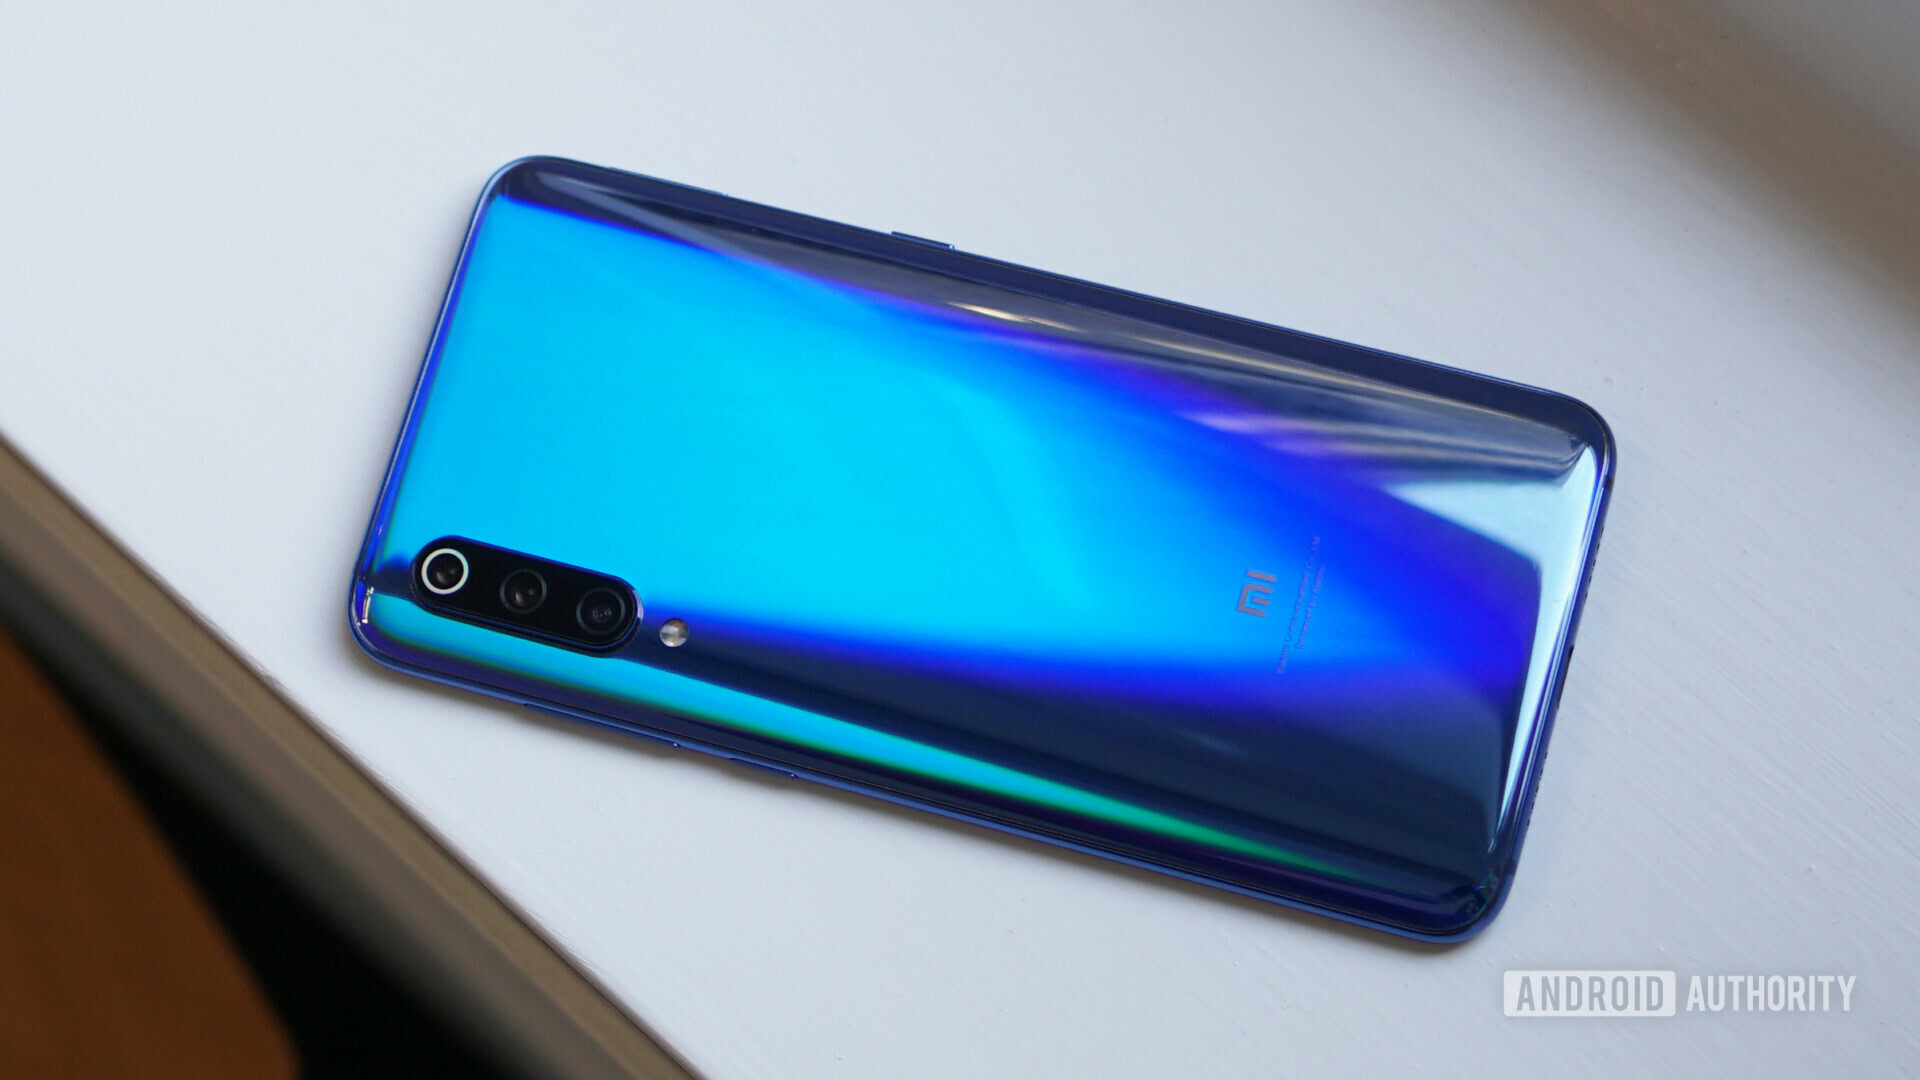 Xiaomi Mi 9 review: The latest flagship tech at a reasonable